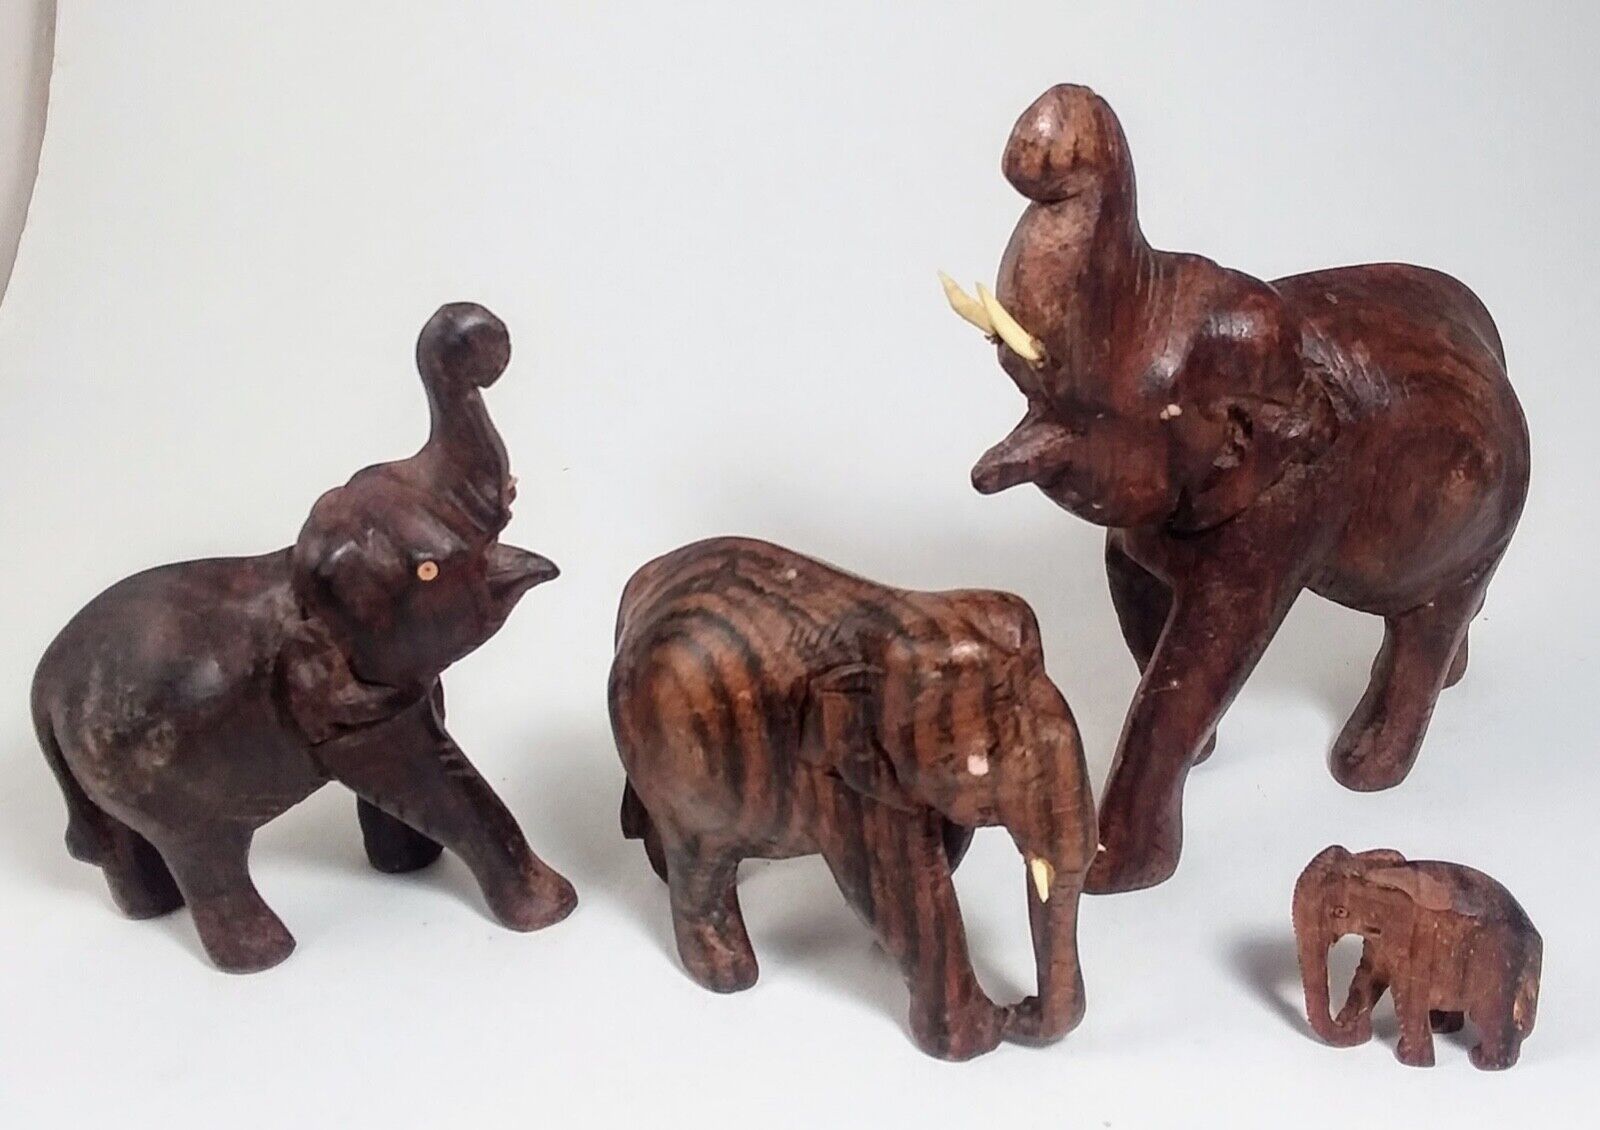 Vintage Hand Carved Wooden Elephants Lot of 4 India Label Adult Juveniles Baby